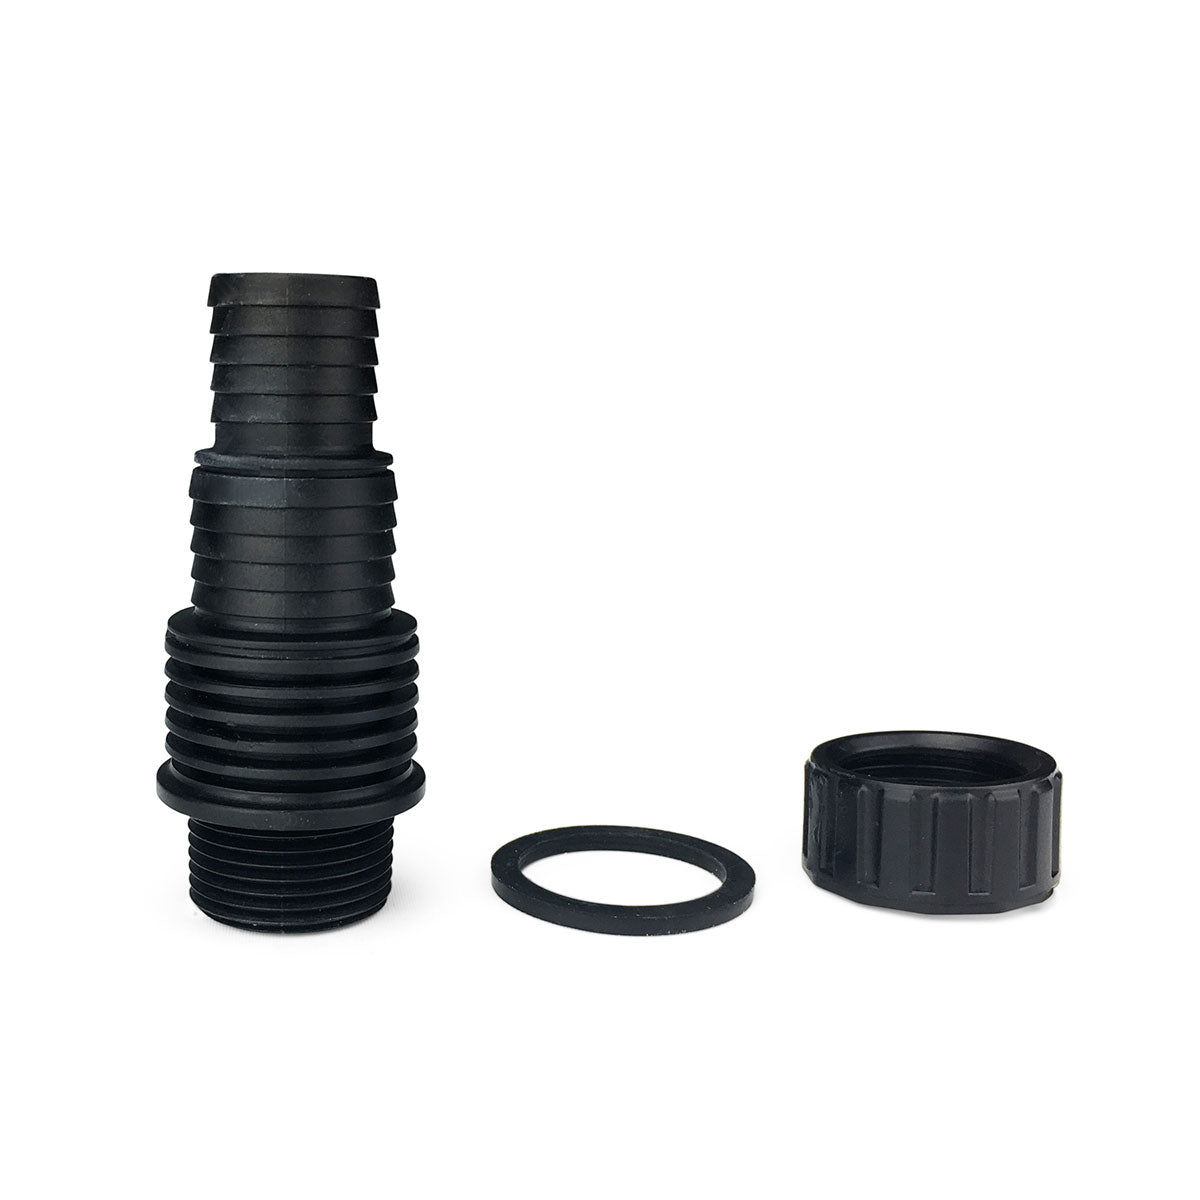 Photo of Aquascape Pond Waterfall Filter Replacement Parts - Aquascape Canada